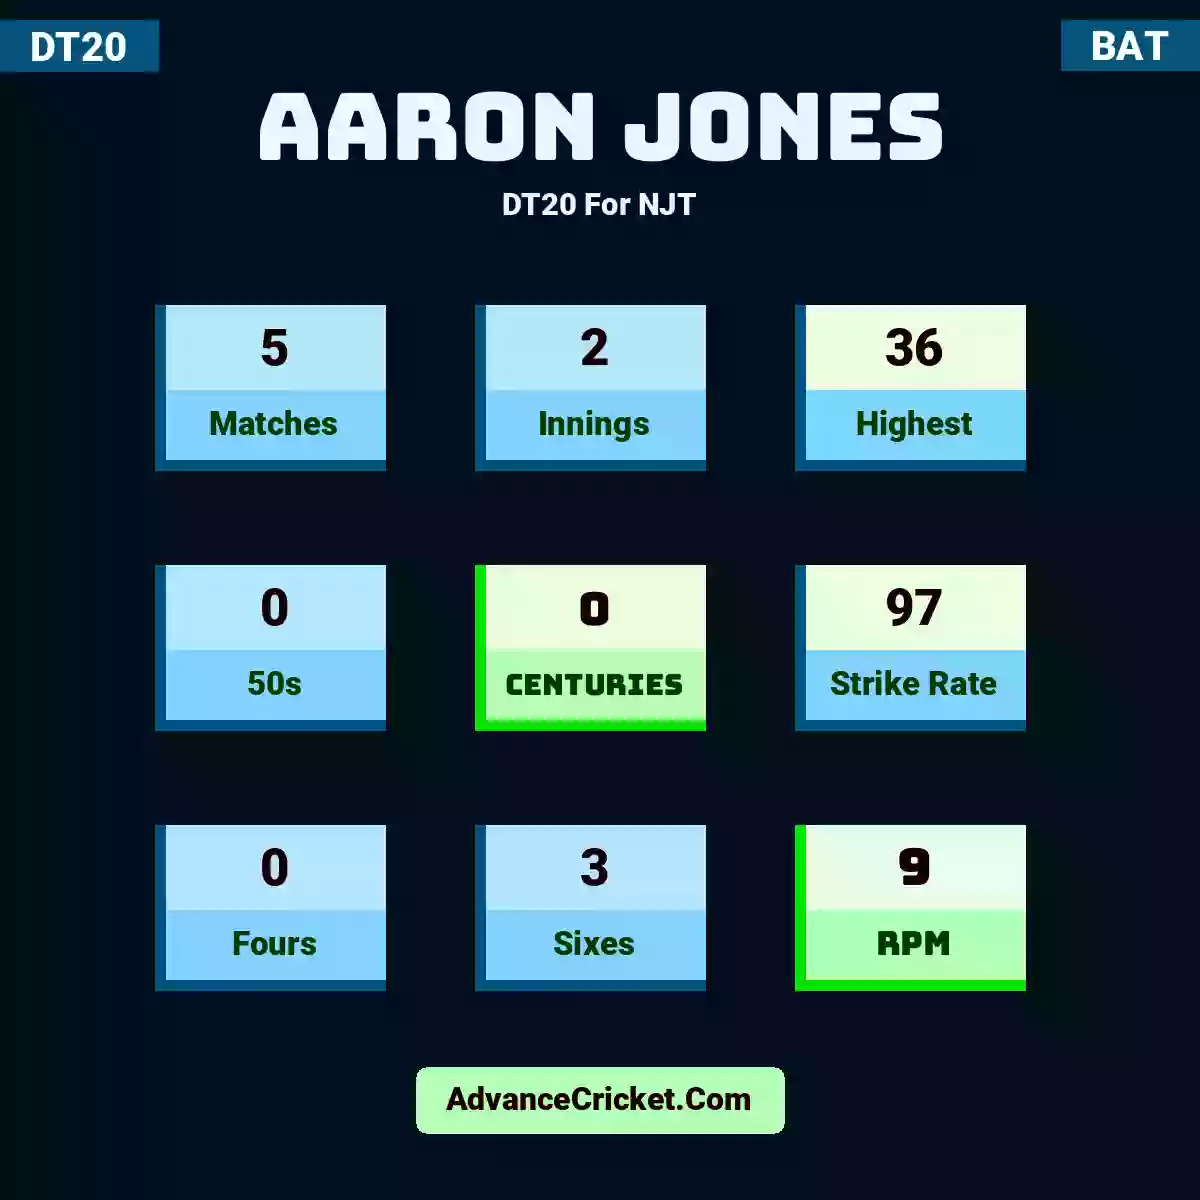 Aaron Jones DT20  For NJT, Aaron Jones played 5 matches, scored 36 runs as highest, 0 half-centuries, and 0 centuries, with a strike rate of 97. A.Jones hit 0 fours and 3 sixes, with an RPM of 9.